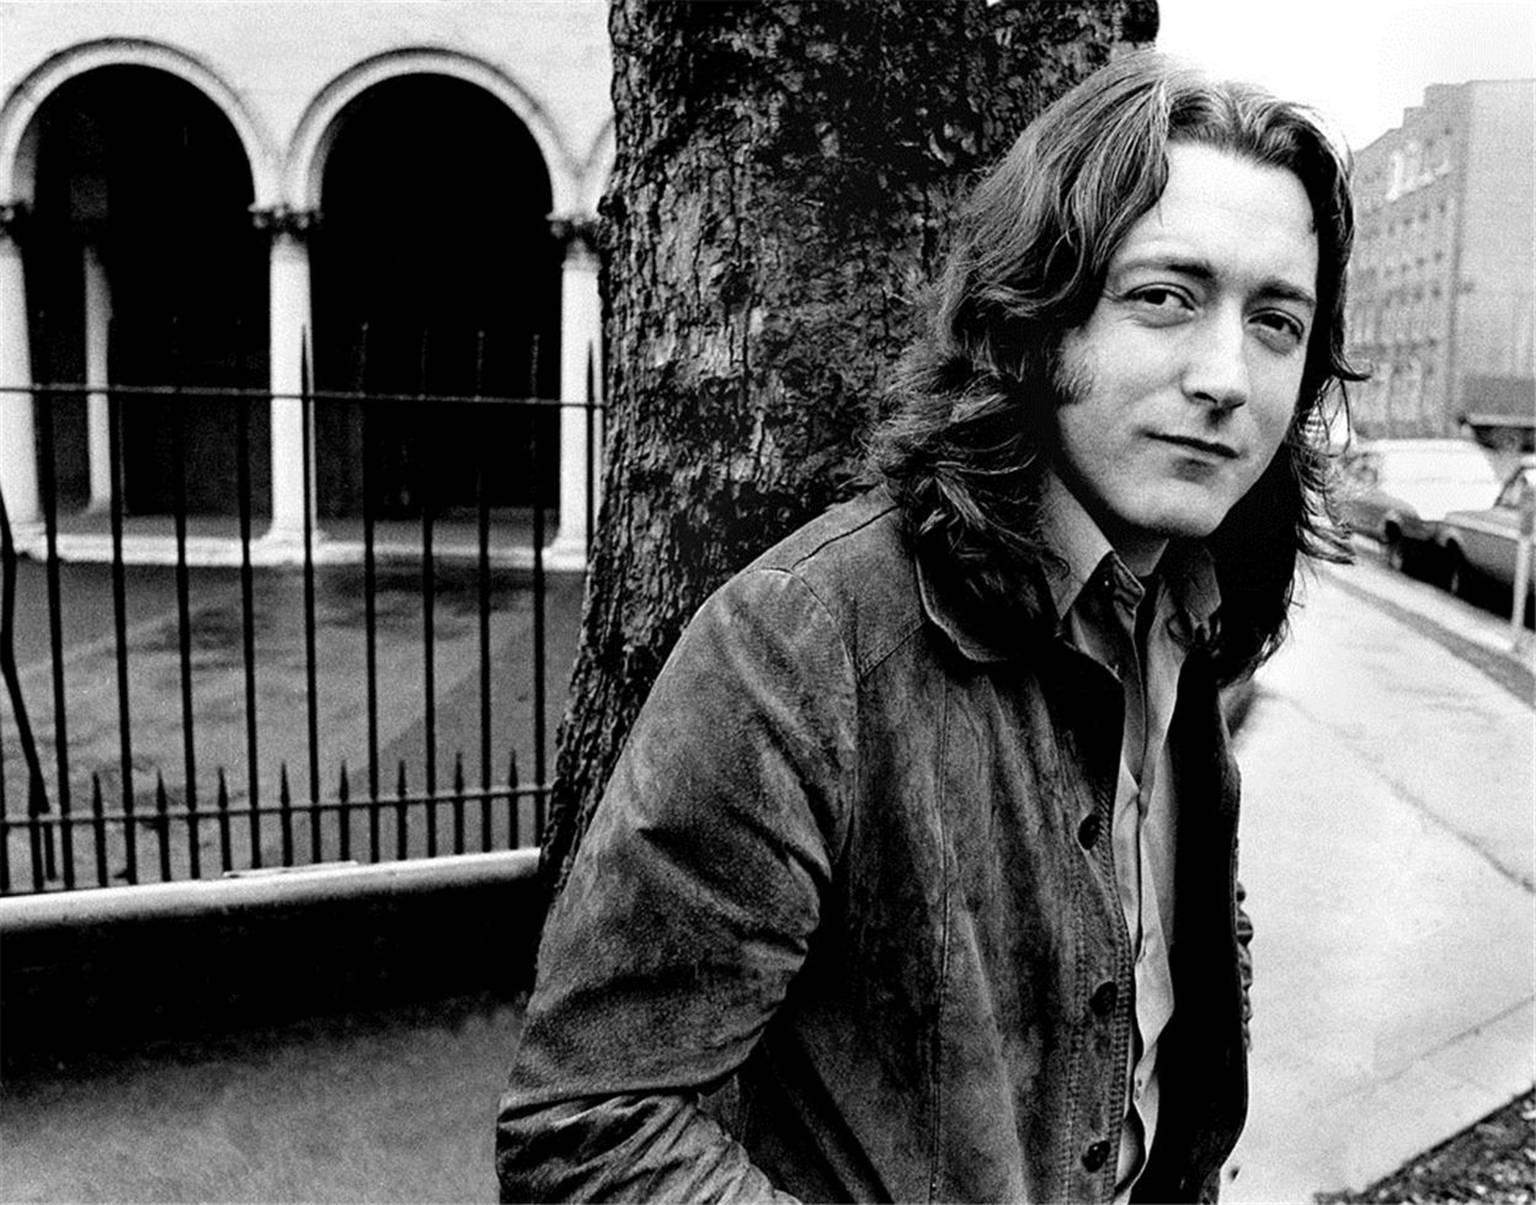 Colm Henry Black and White Photograph – 1983 in Dubliner Stadt von Rory Gallagher